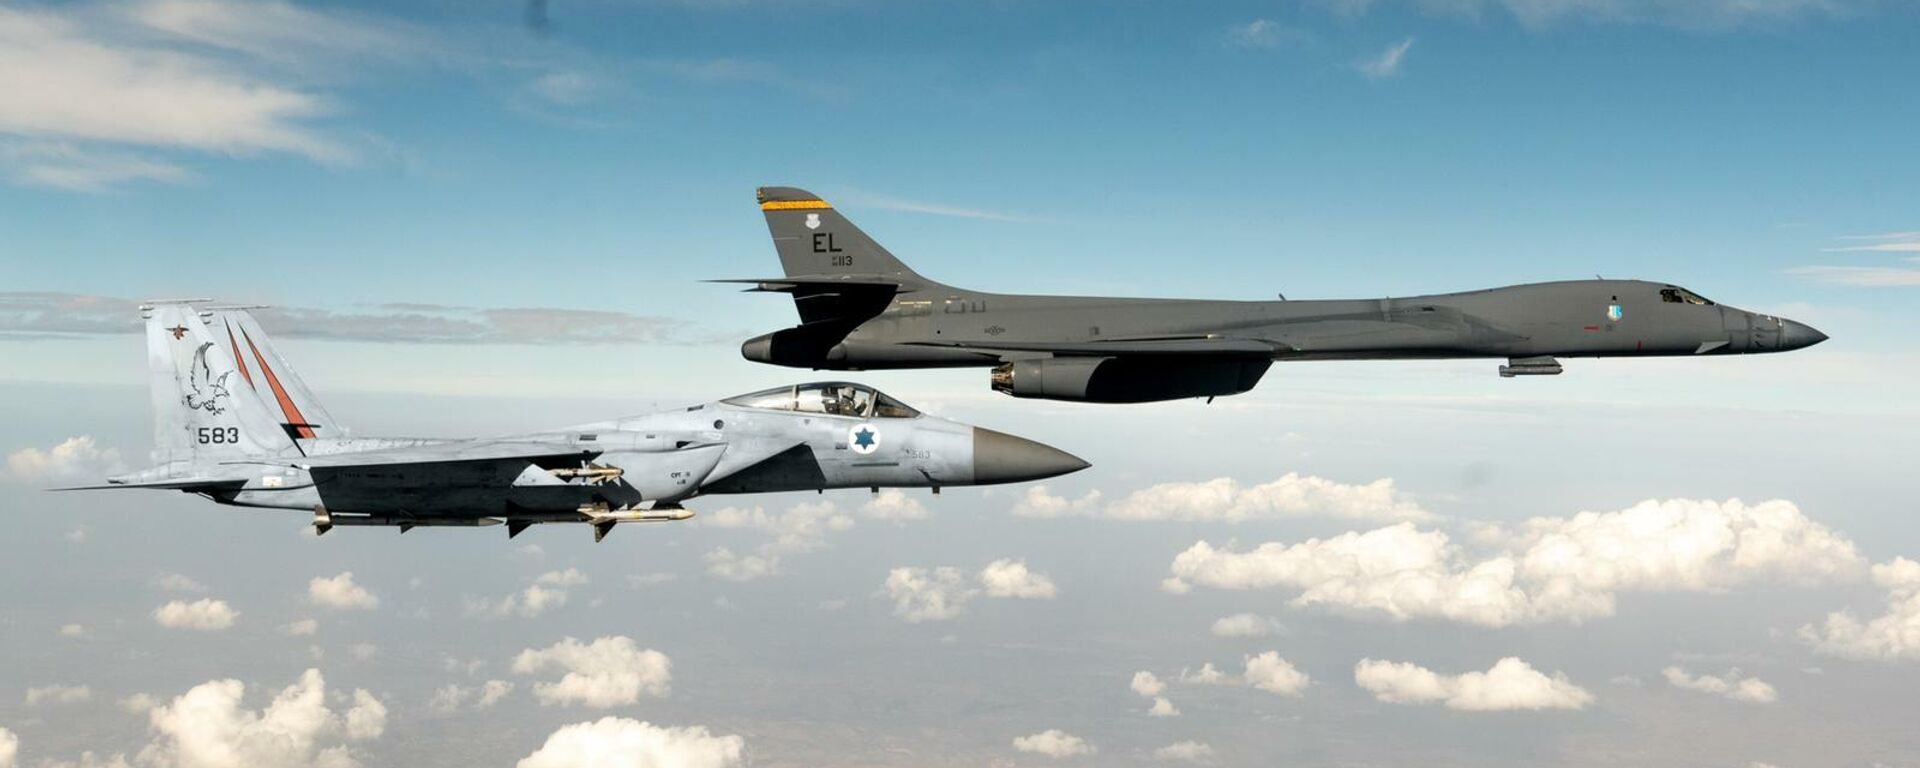 IDF says F-15 fighter jets escorted a US B-1 bomber over Israel's skies towards the Gulf on October 30, 2021. - Sputnik International, 1920, 16.01.2022